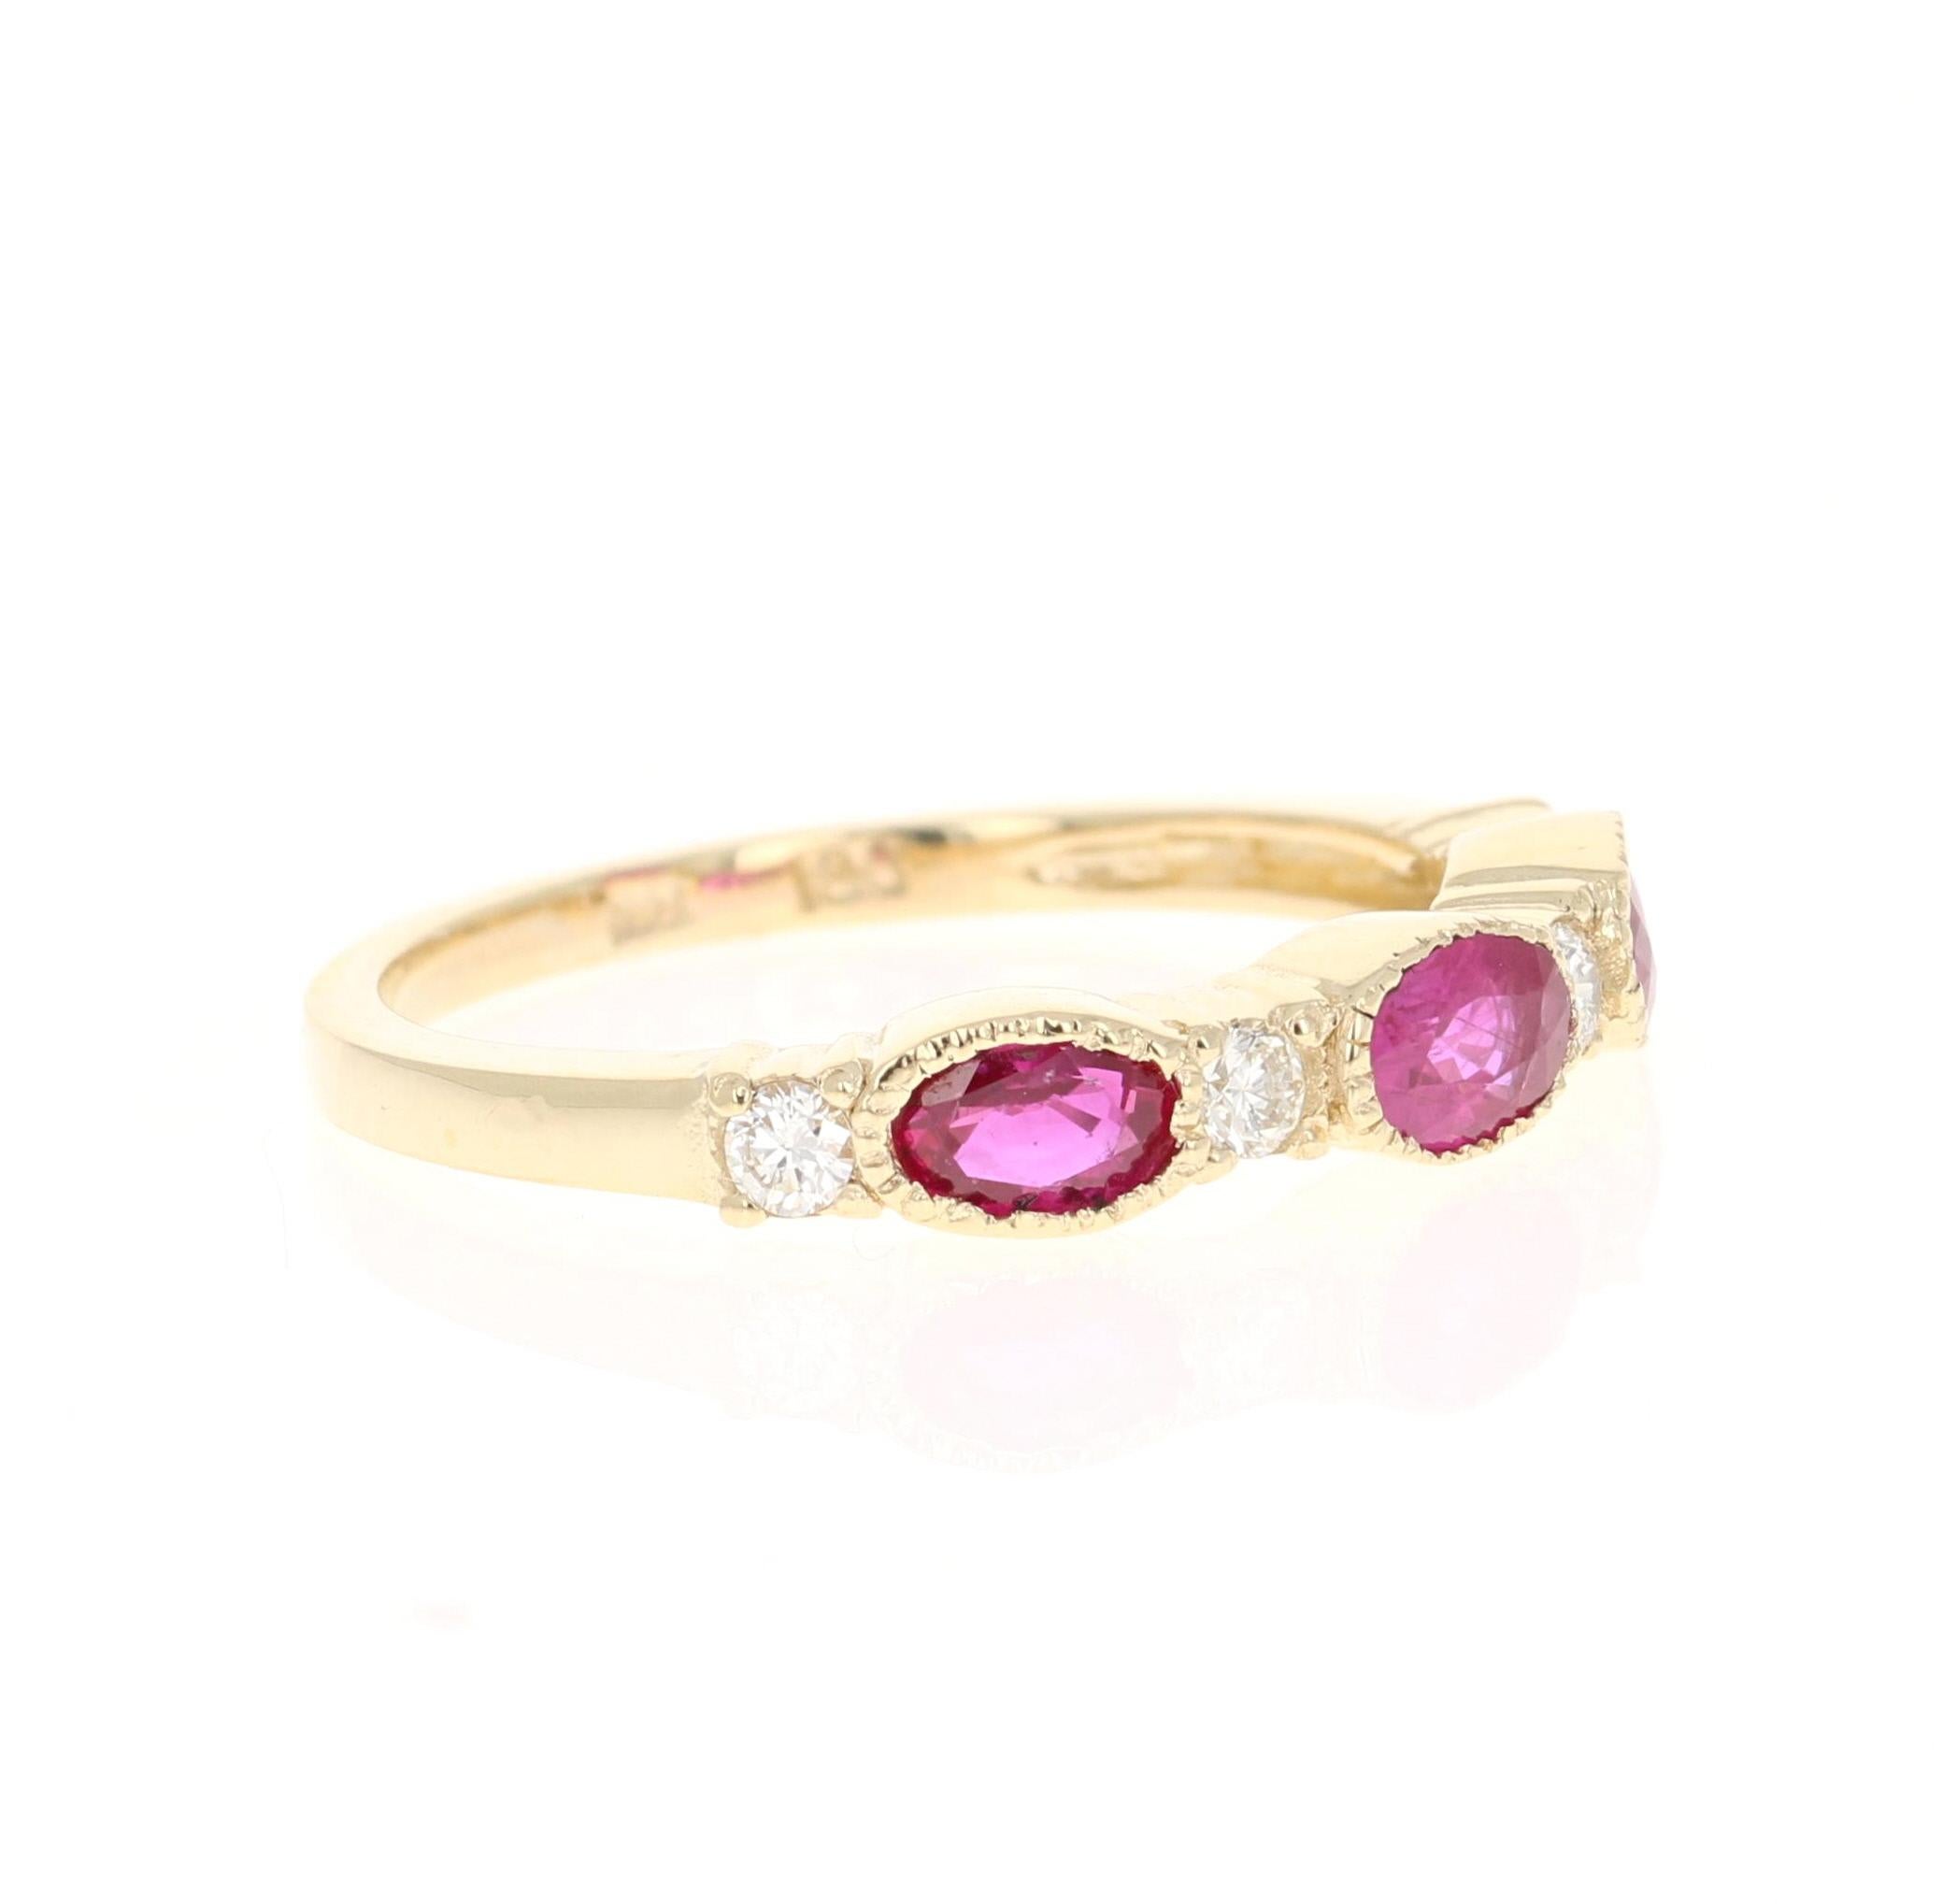 This ring has 3 Oval Cut Rubies that weigh 1.15 carats and 4 Round Cut Diamonds that weigh 0.17 carats. (Clarity: VS, Color: H) The total carat weight of the ring is 1.34 carats. 

The ring is designed in 14 Karat Yellow Gold and weighs